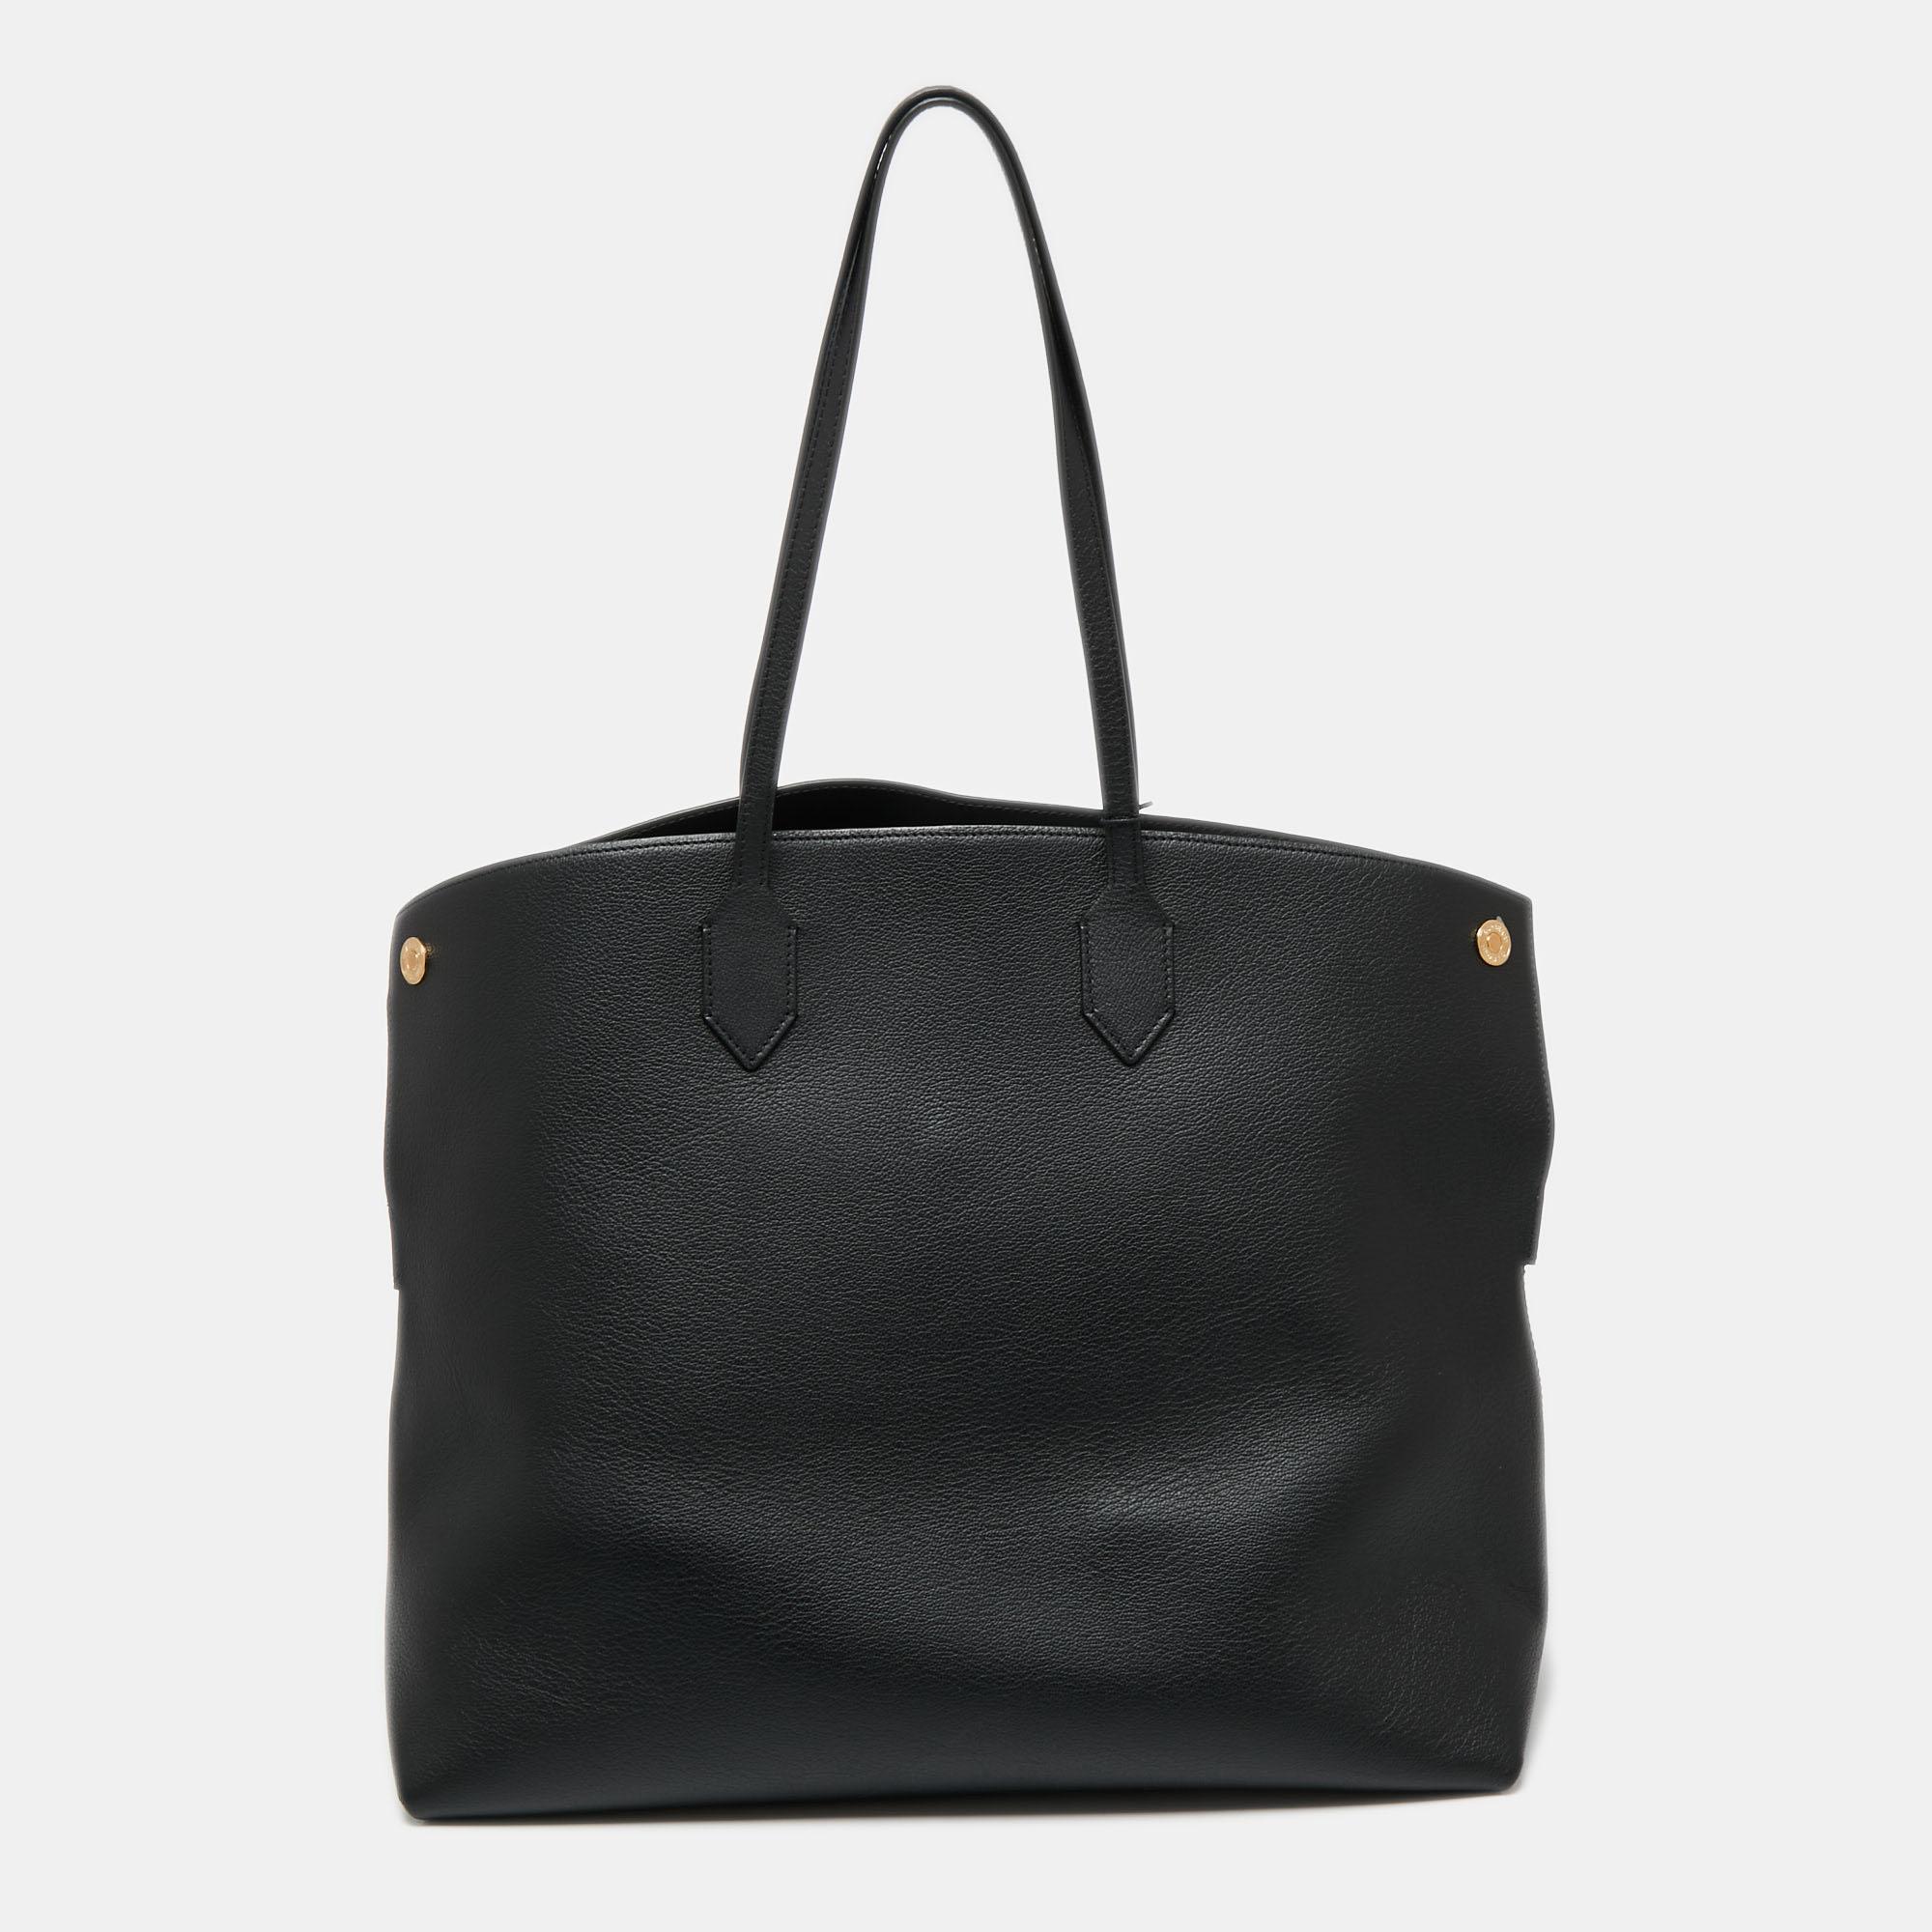 With a refined construction and contemporary shape, this Burberry tote is ideal for everyday use. Its pointed edges at the top elevated the silhouette and gold-tone accents add to its charm. Crafted from leather, it flaunts dual handles at the top